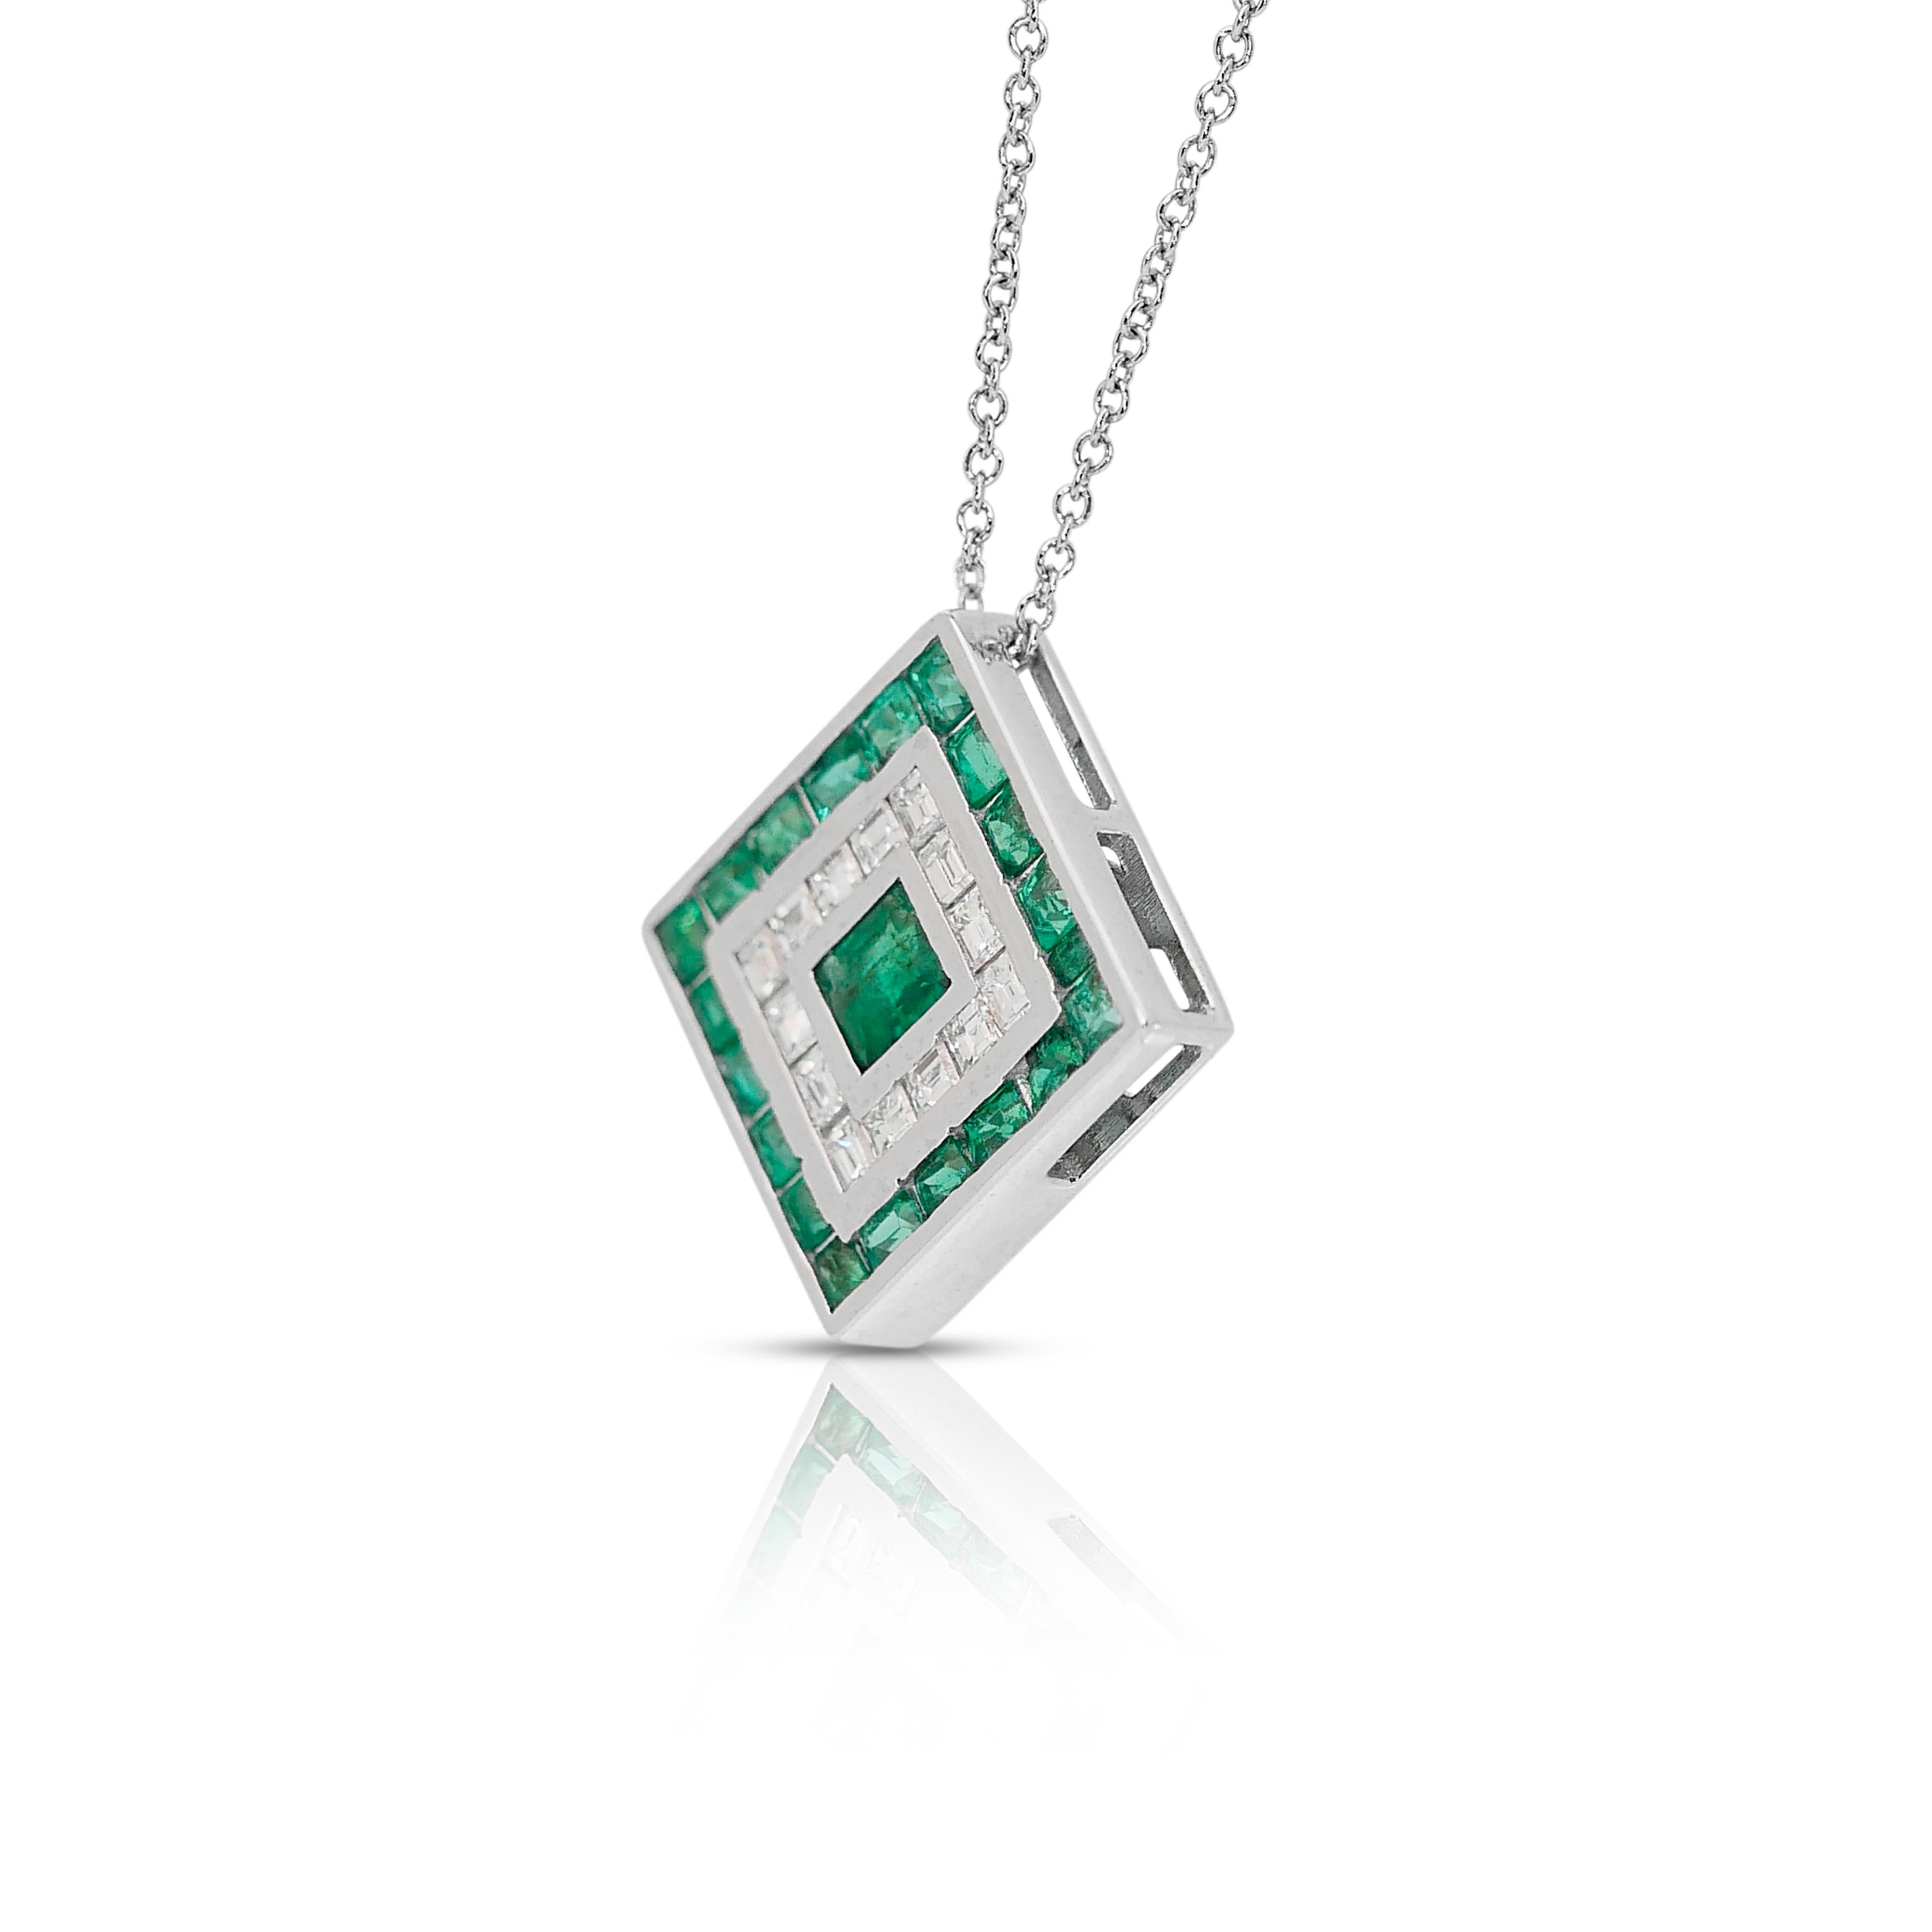 Captivating 1.45ct Emeralds and Diamonds Halo Necklace in 14k White Gold - IGI  For Sale 1